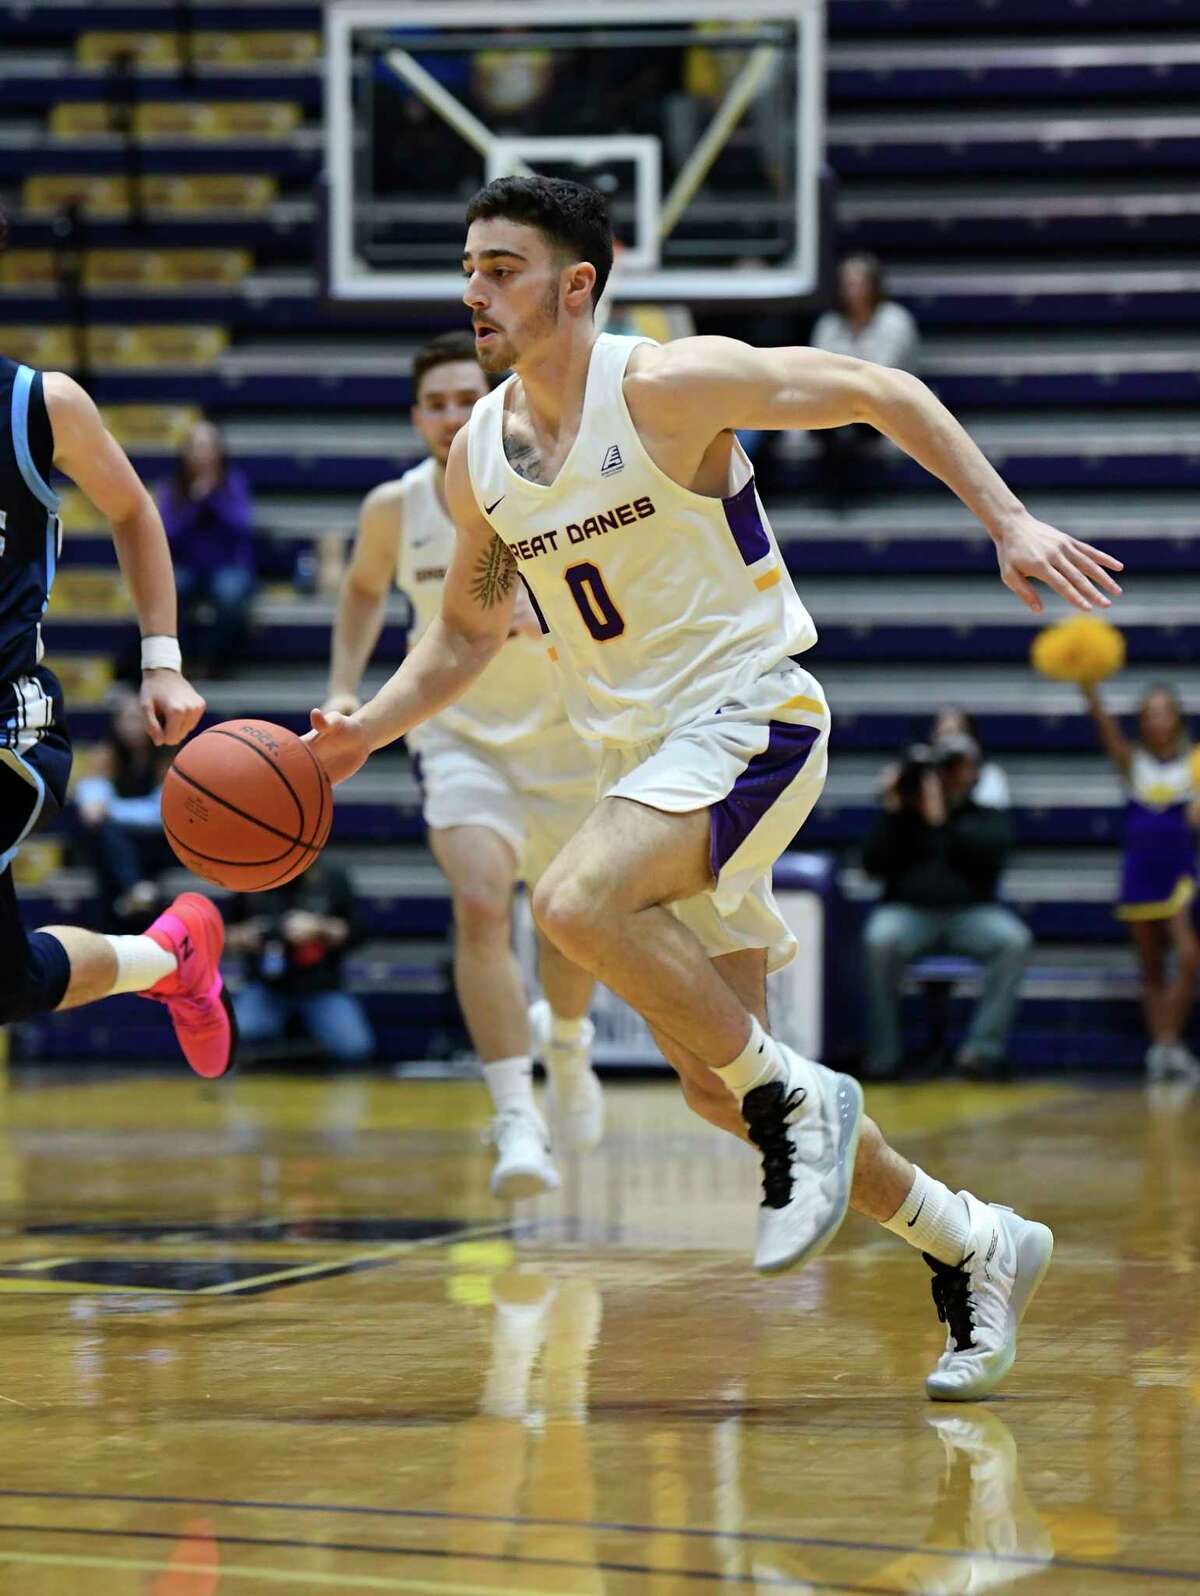 University at Albany guard Antonio Rizzuto (0) moves the ball against Maine during the first half of an NCAA basketball game Saturday Jan. 11, 2020, in Albany, N.Y.